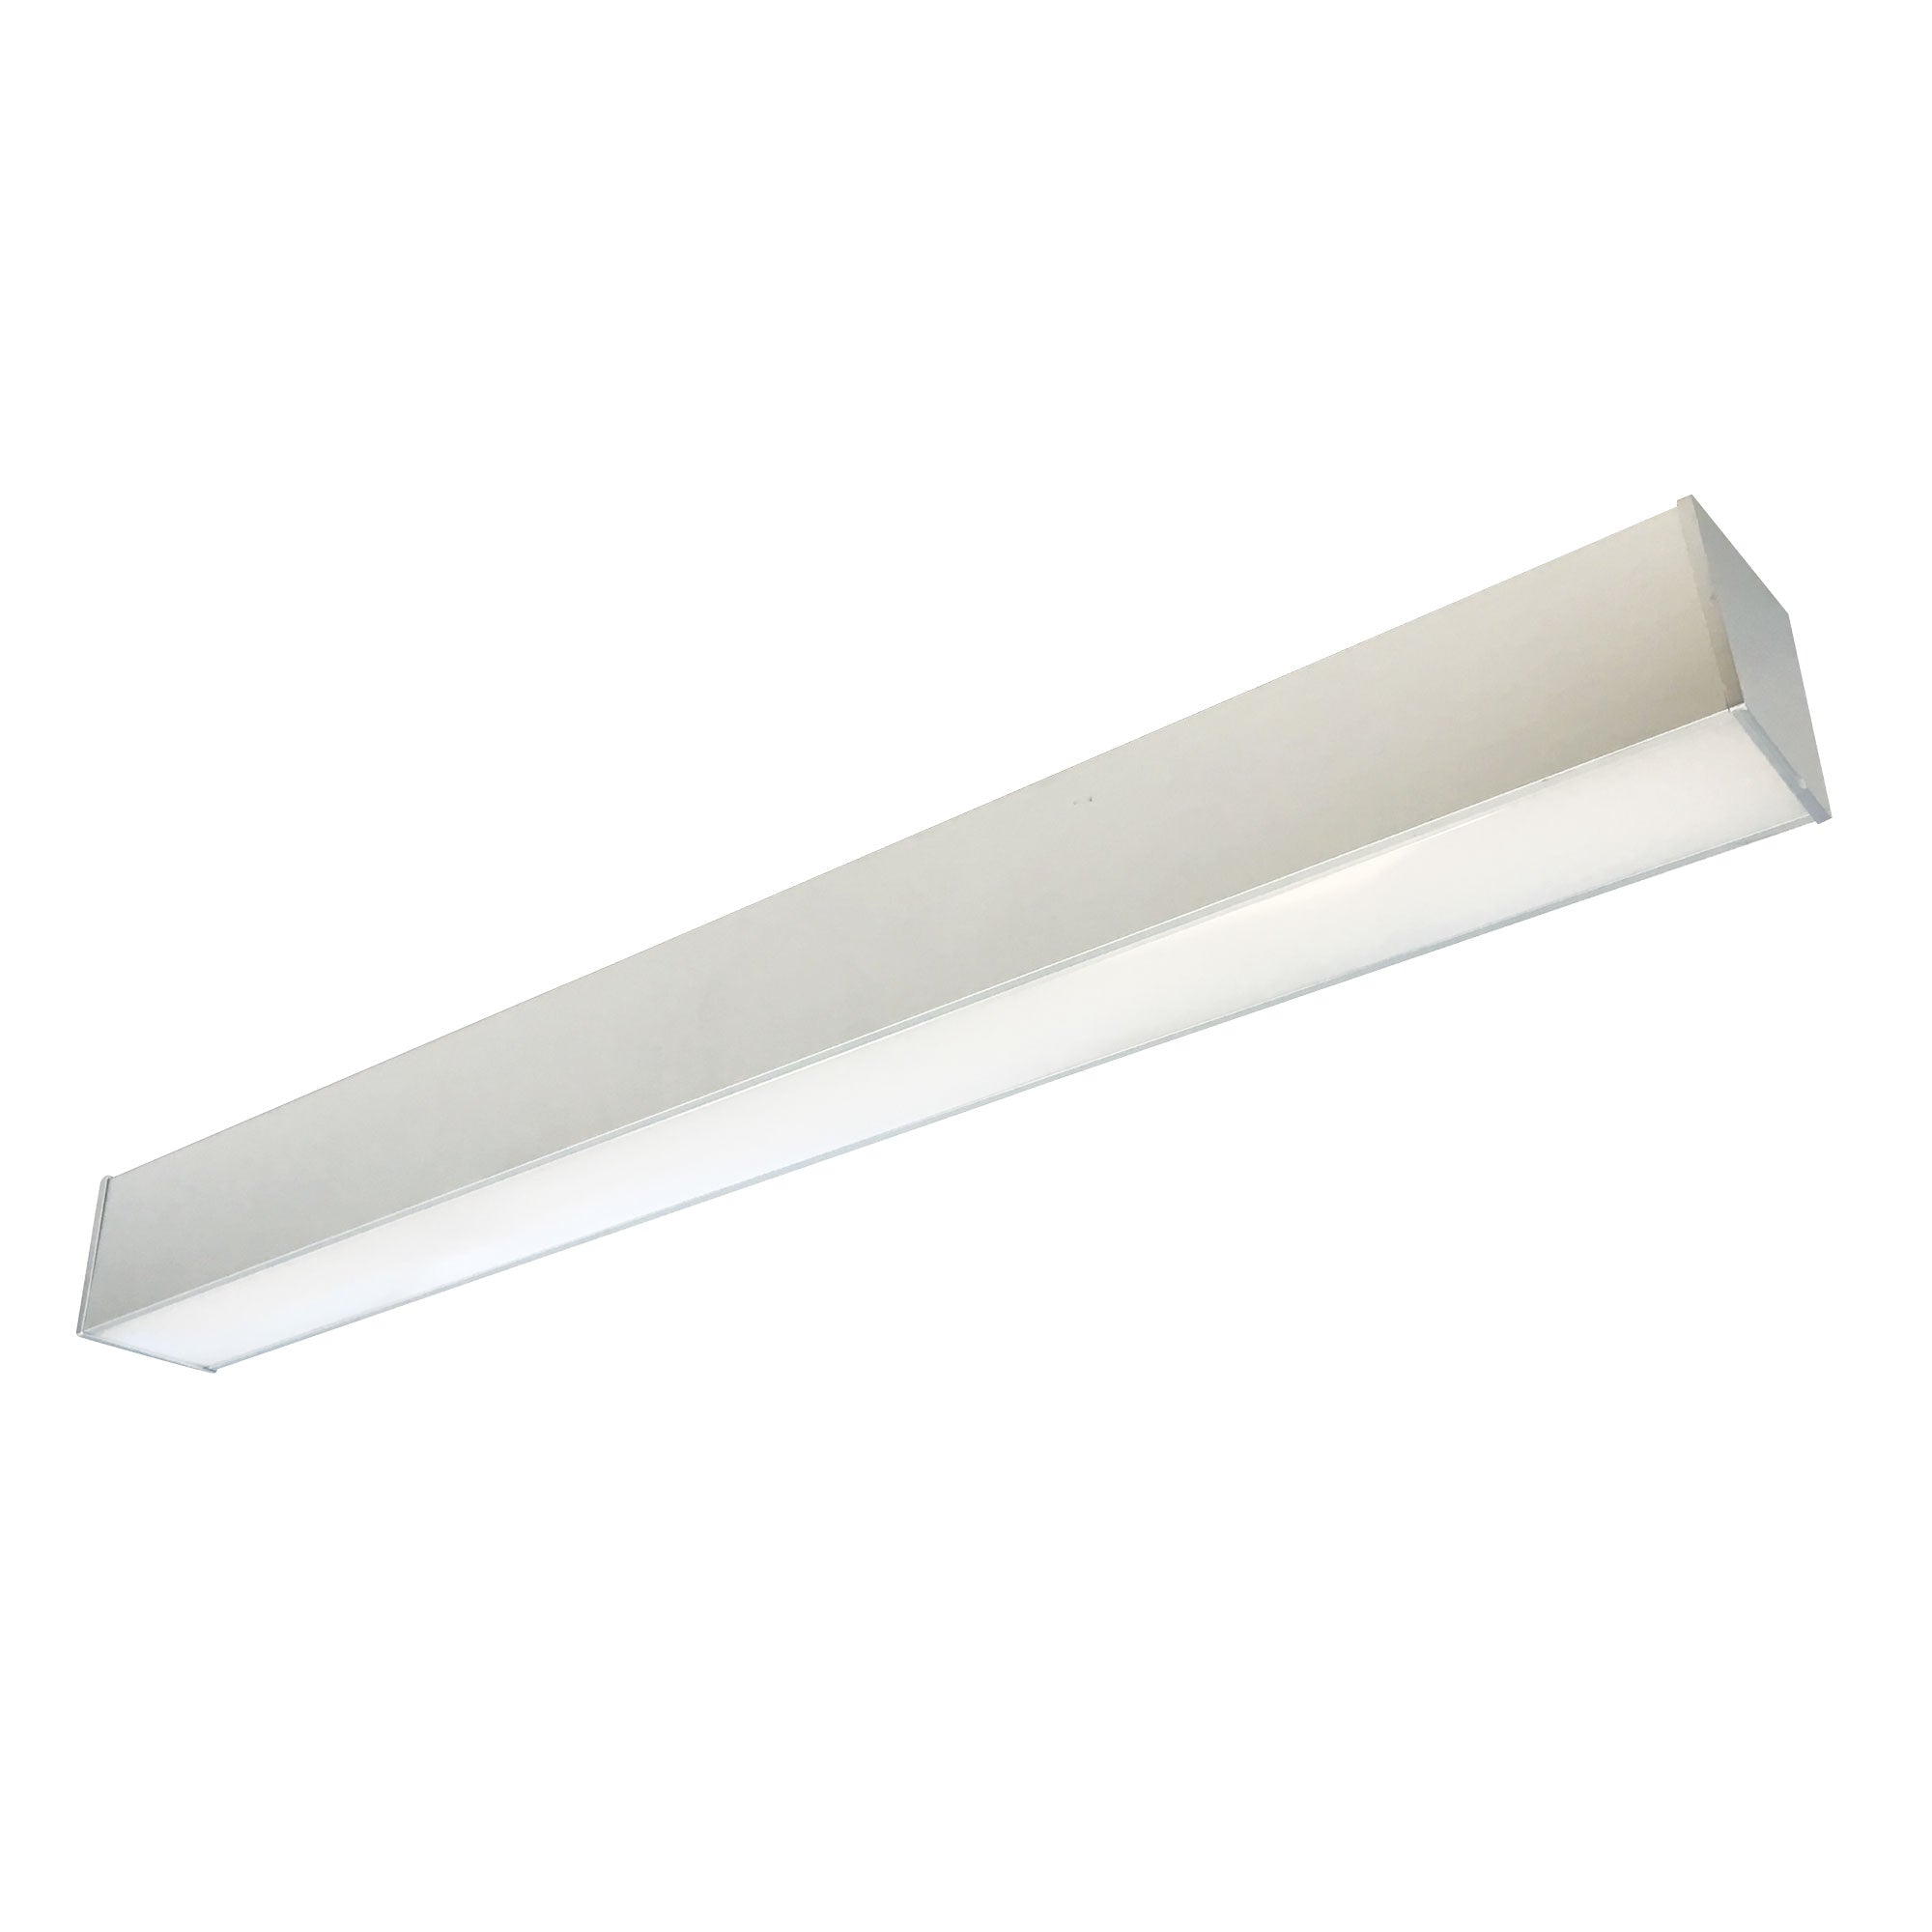 Nora Lighting NLIN-21040A - Linear - 2' L-Line LED Direct Linear w/ Dedicated CCT, 2100lm / 4000K, Aluminum Finish